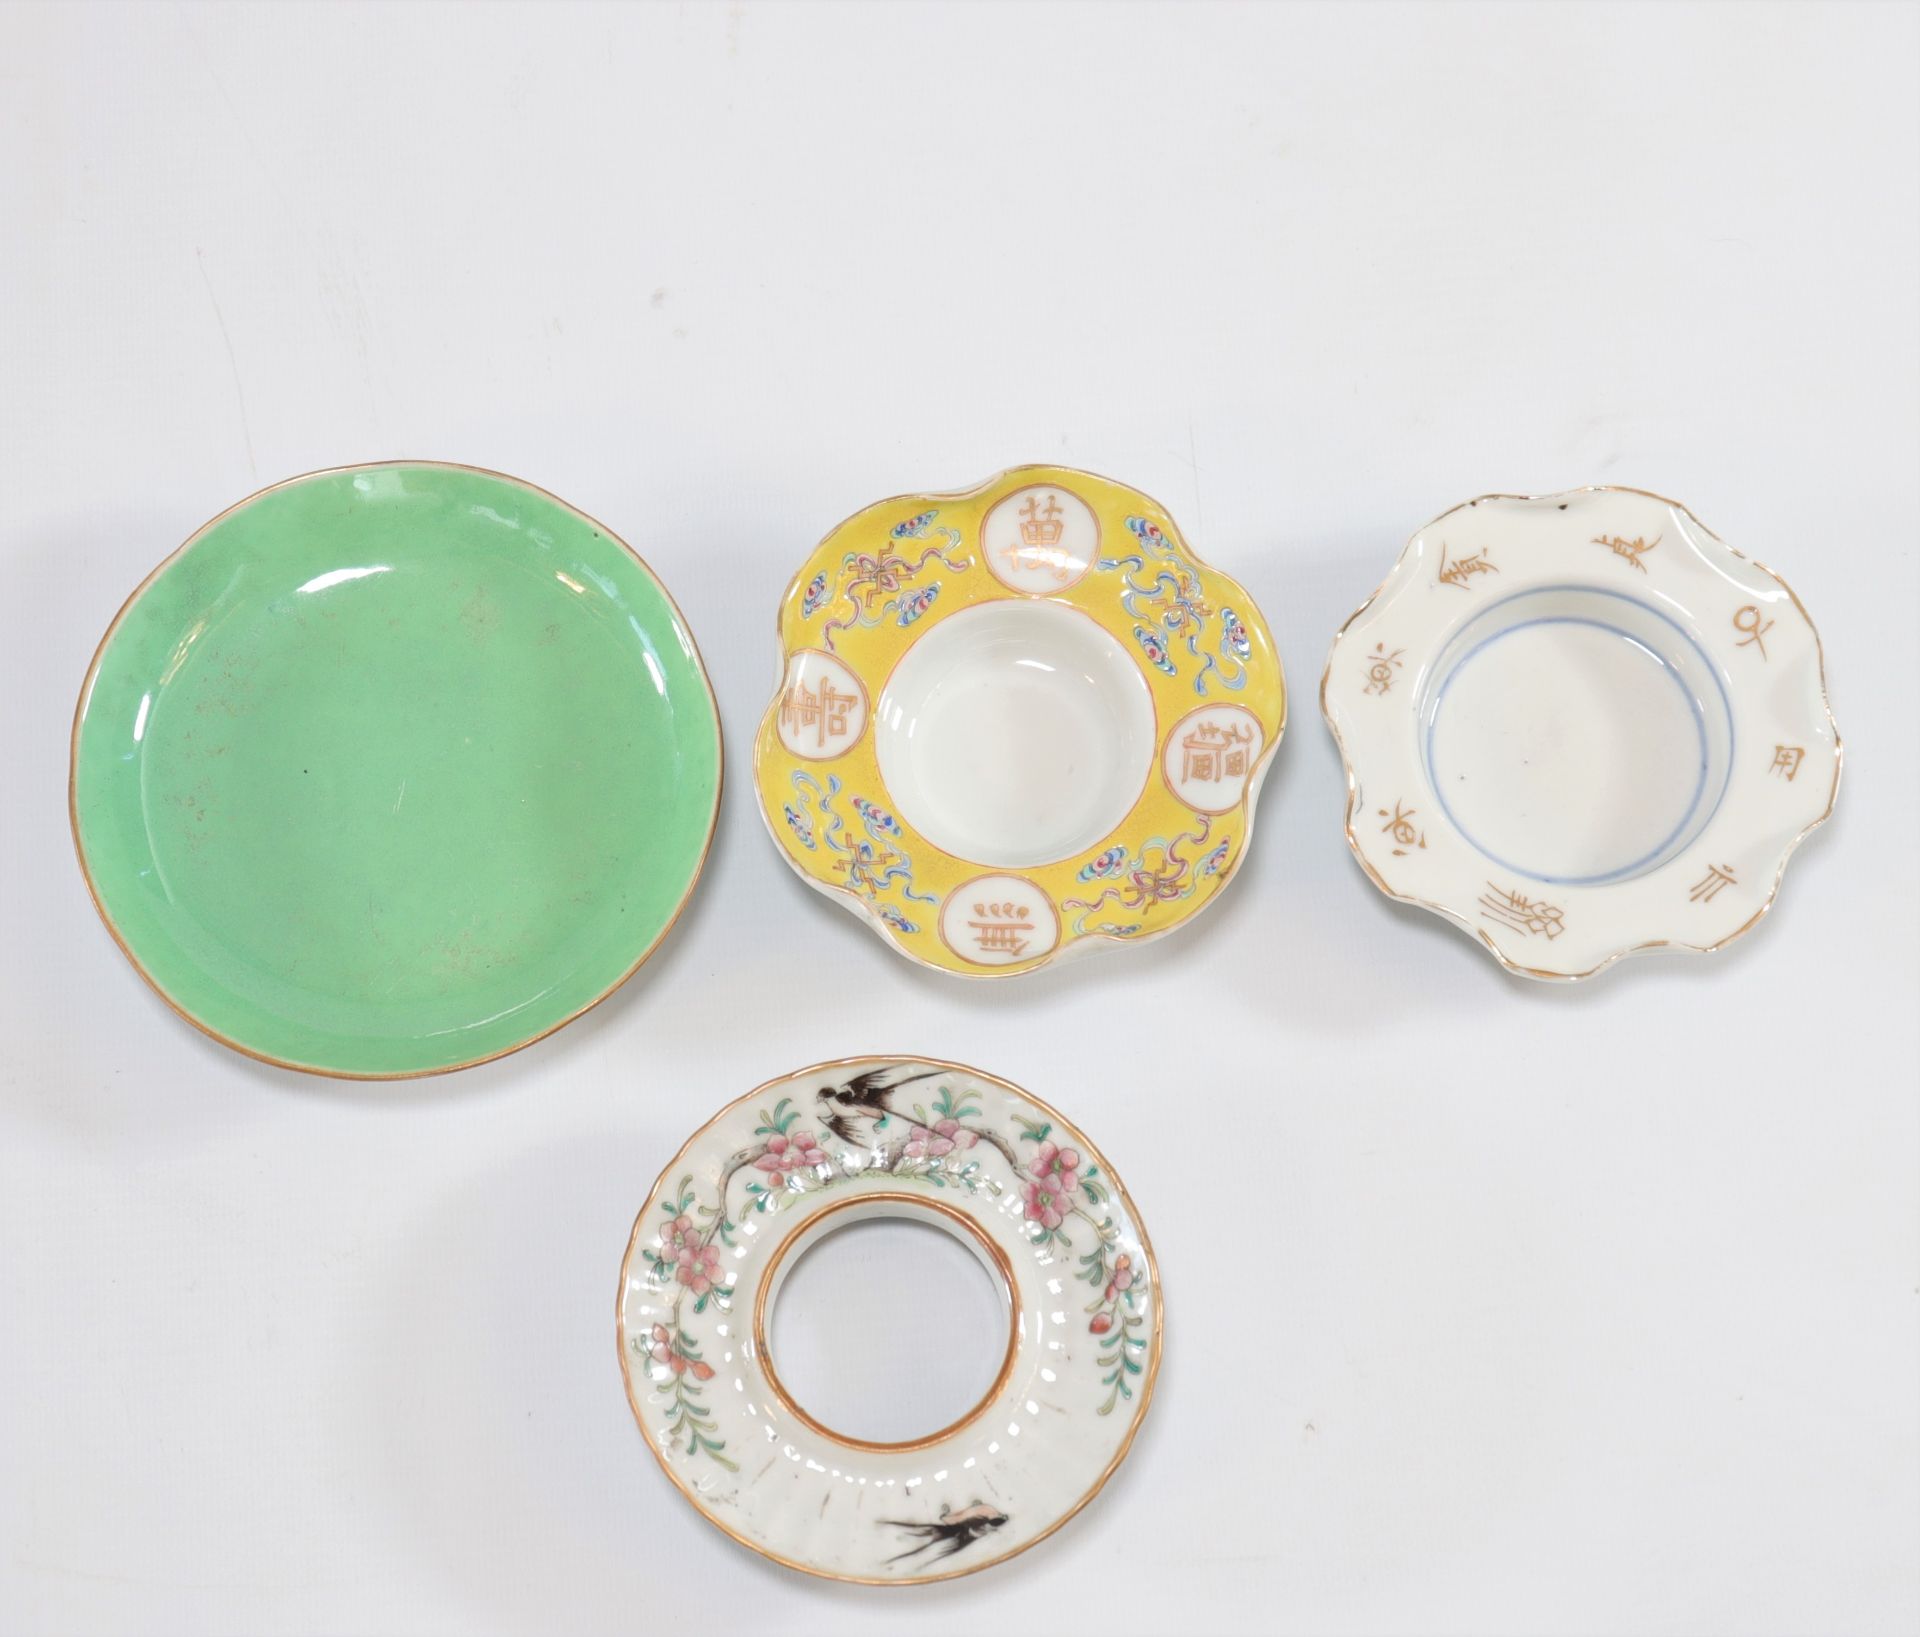 Lot of 4 Chinese porcelains